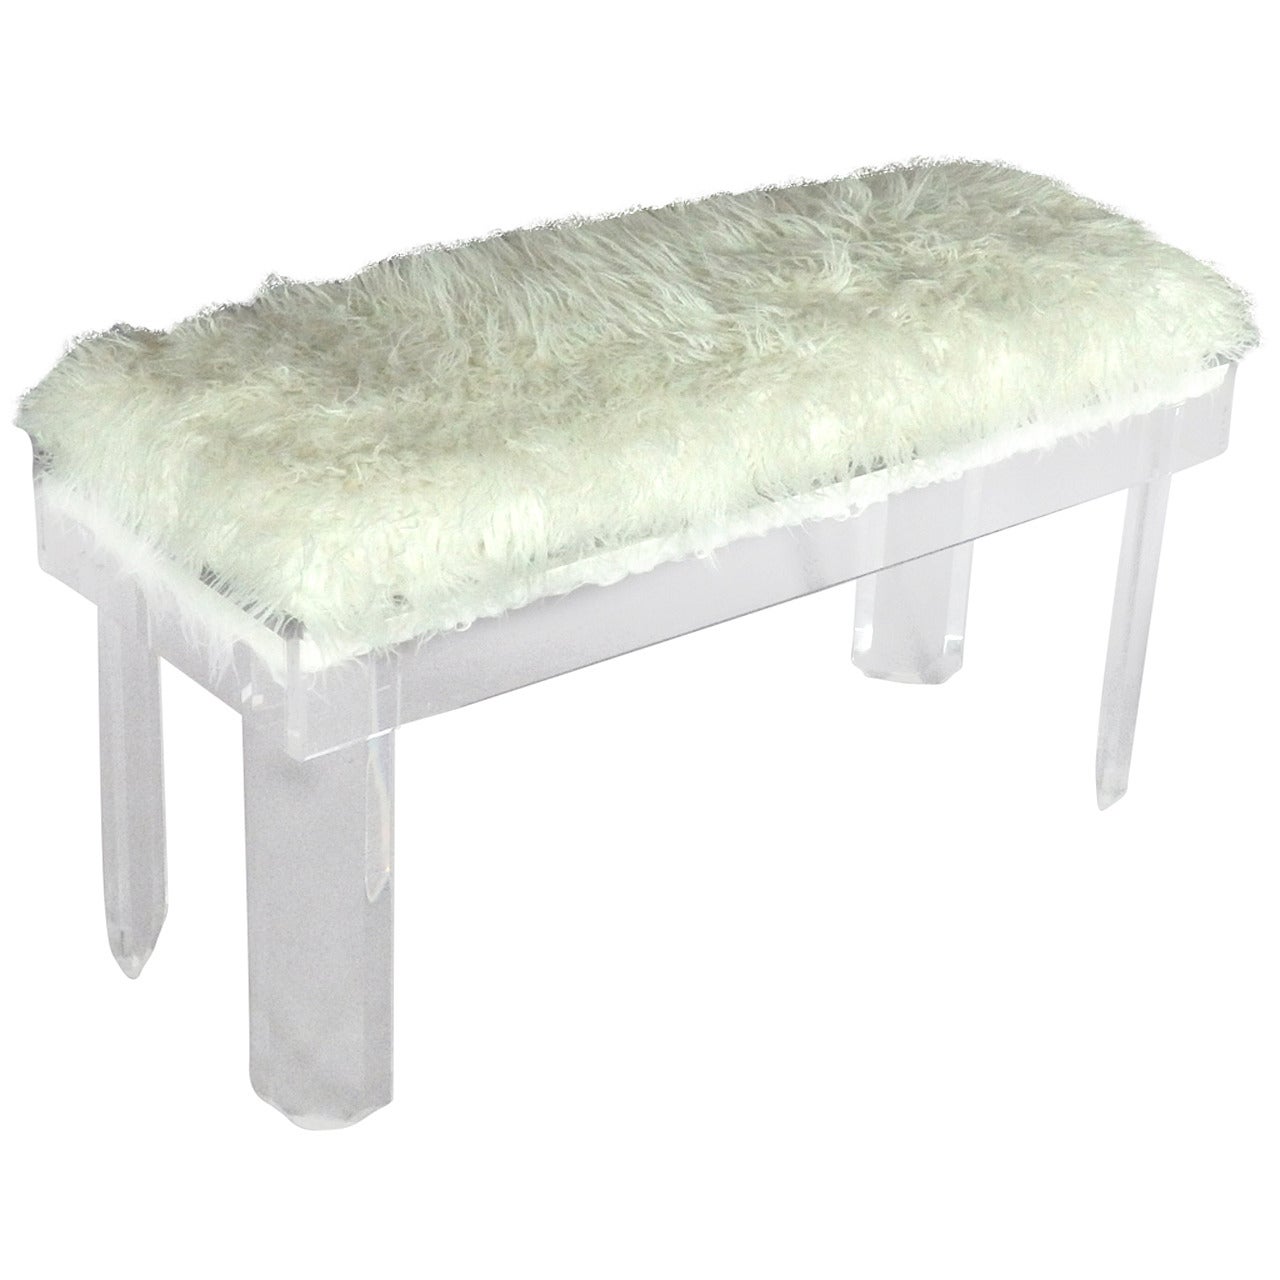 Acrylic Lucite bench upholstered in white faux fur